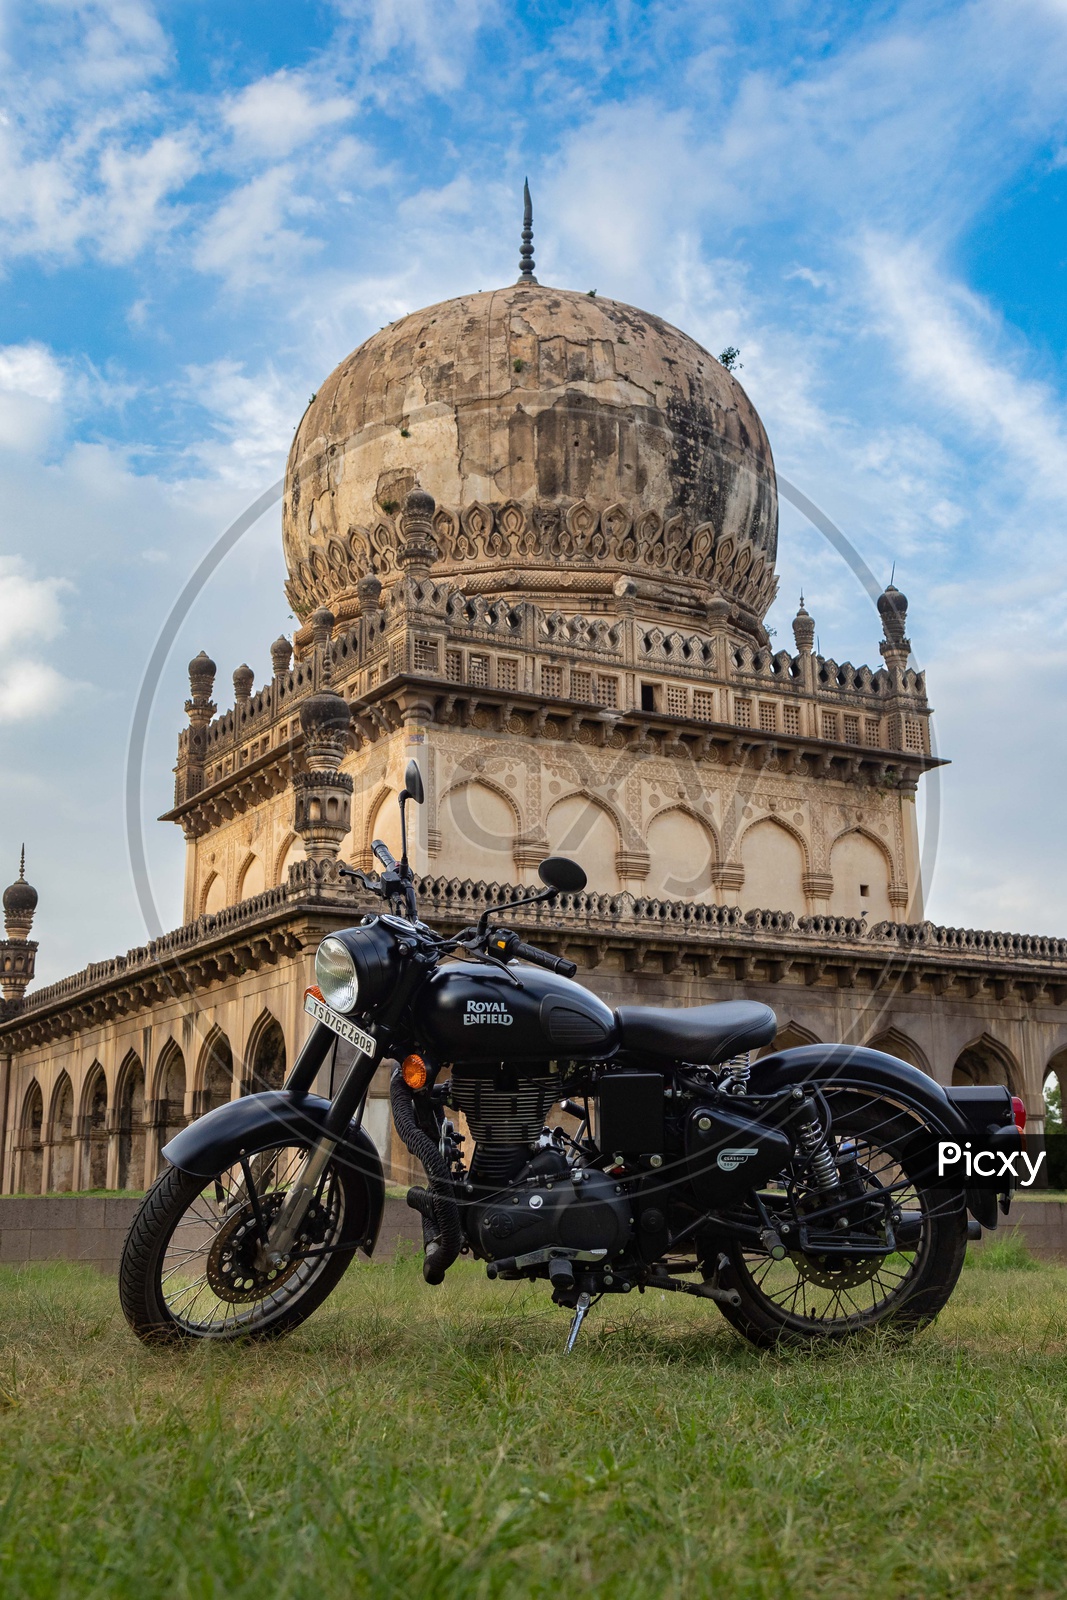 Royal Enfield Bike in front of Qutb Shahi Tombs